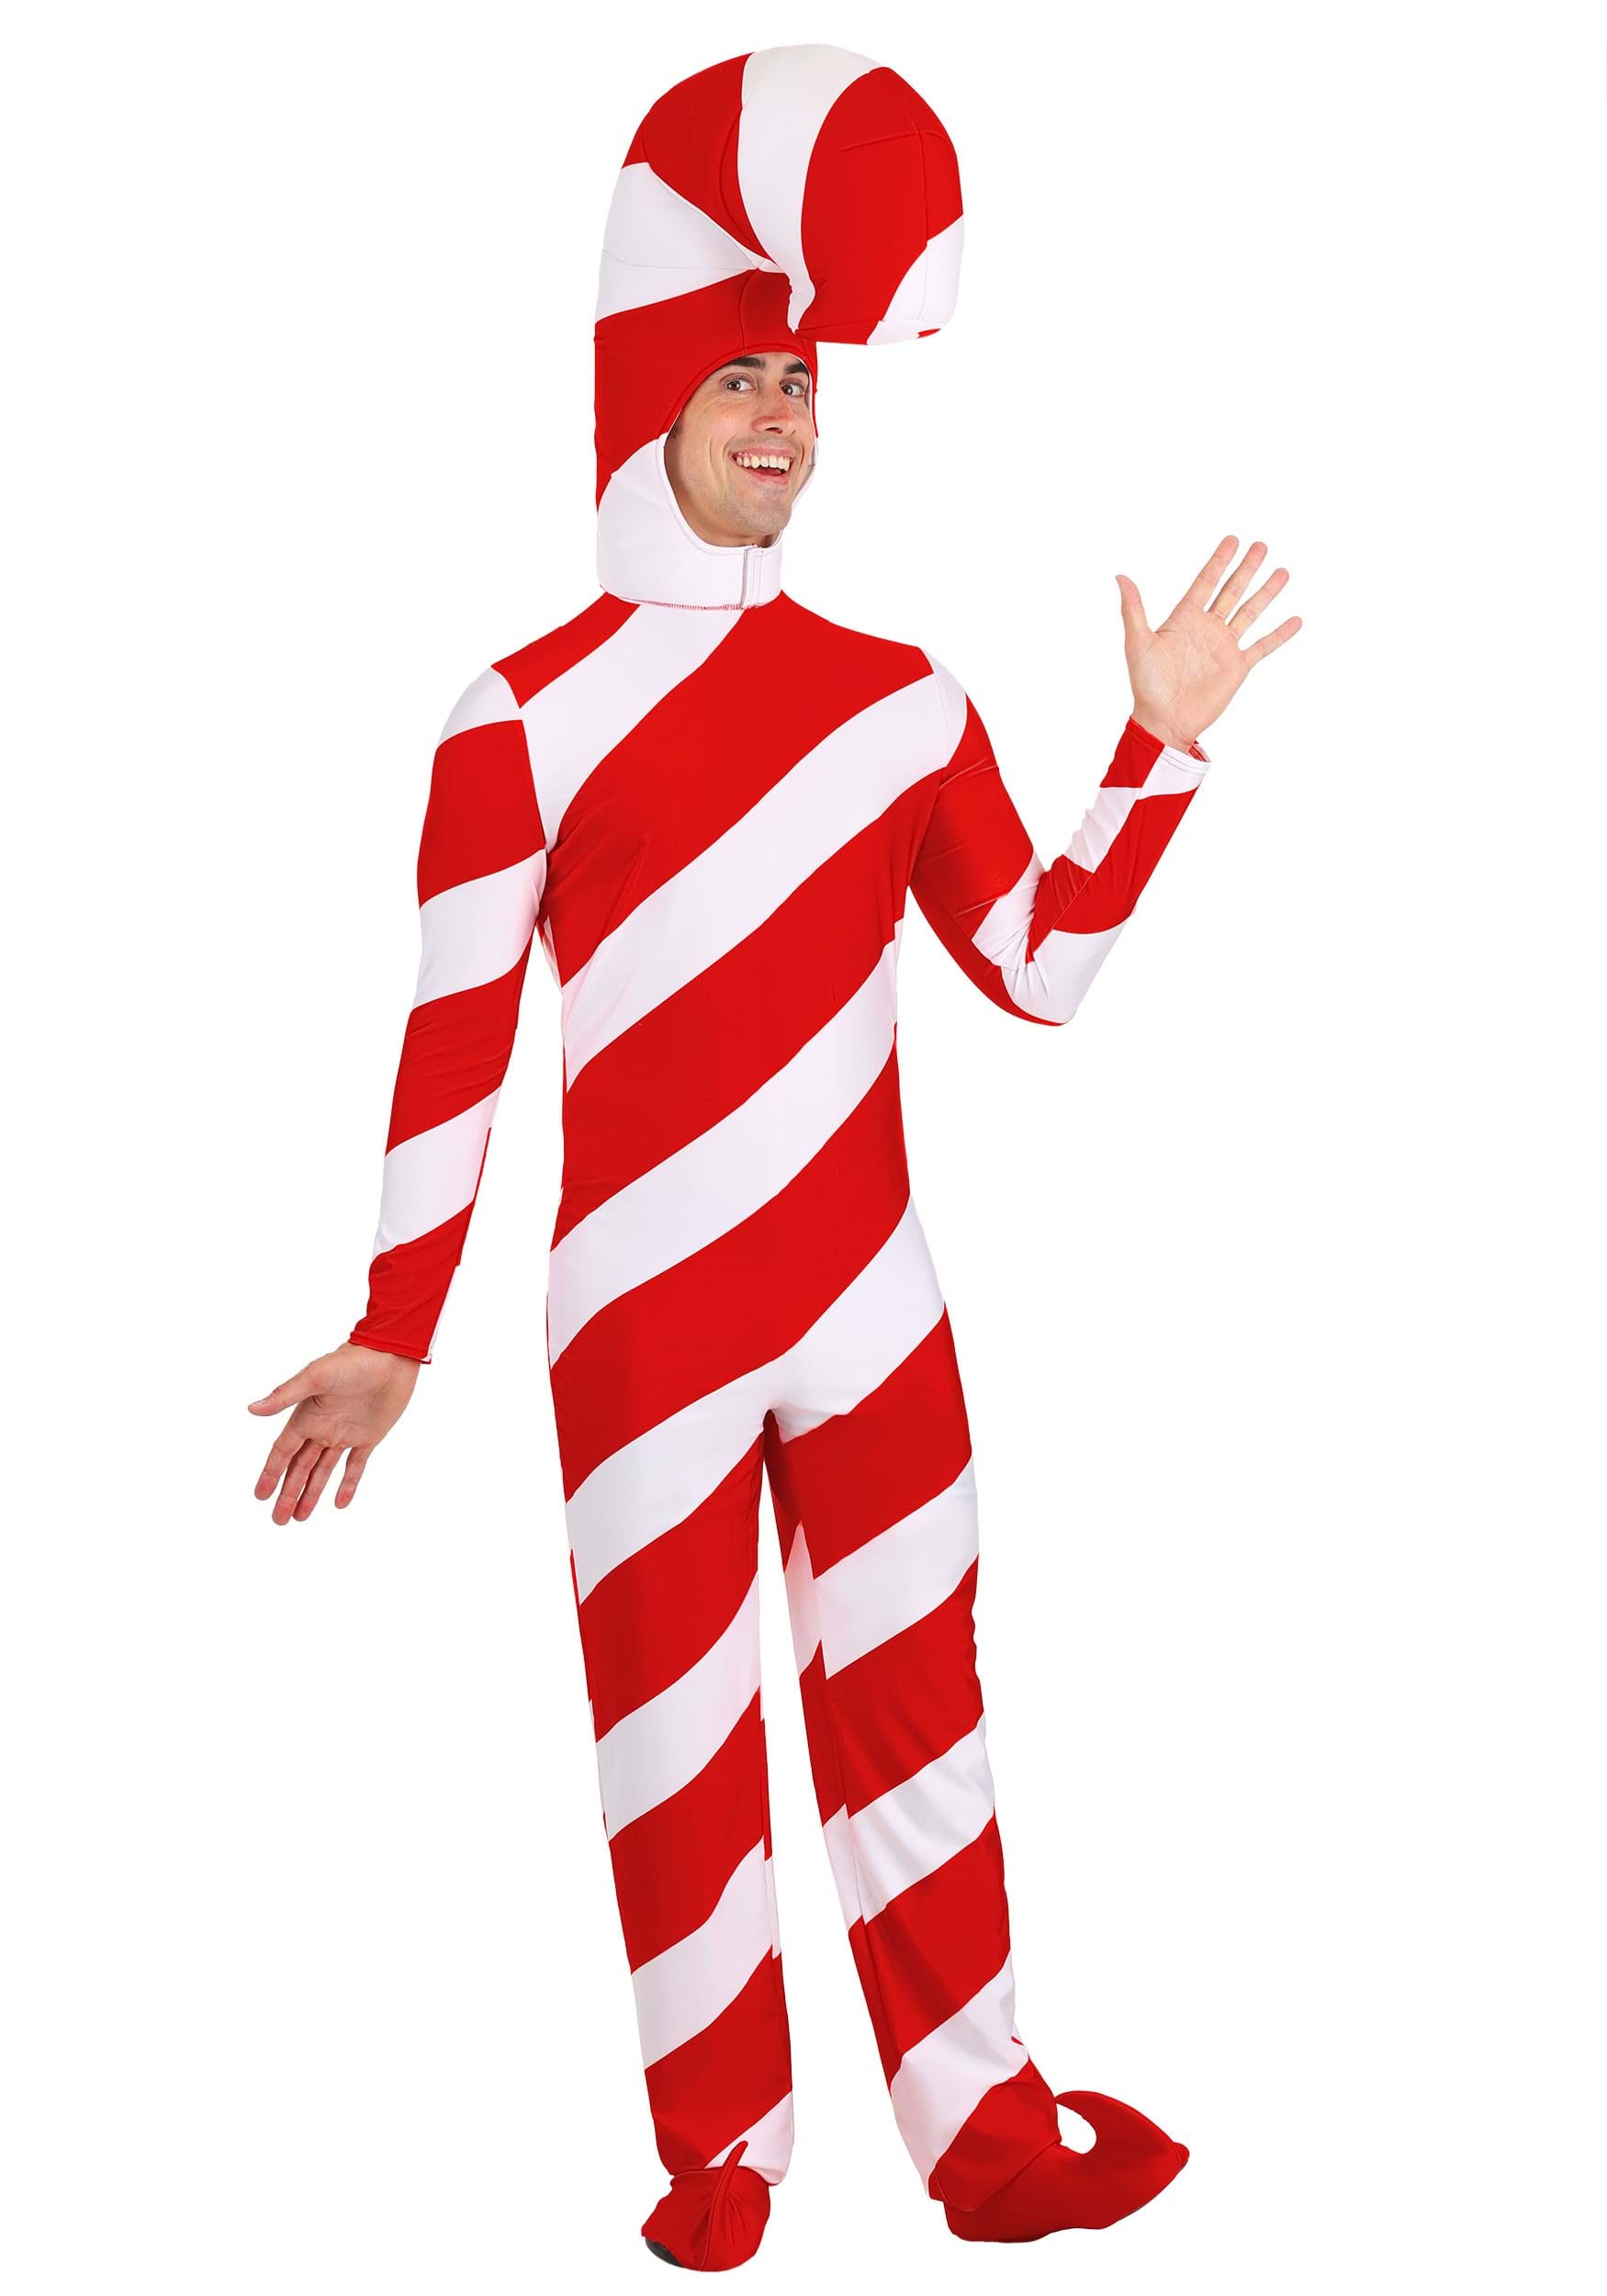 https://images.halloweencostumes.ca/products/60441/2-1-207499/adult-red-candy-cane-bodysuit-alt-6.jpg